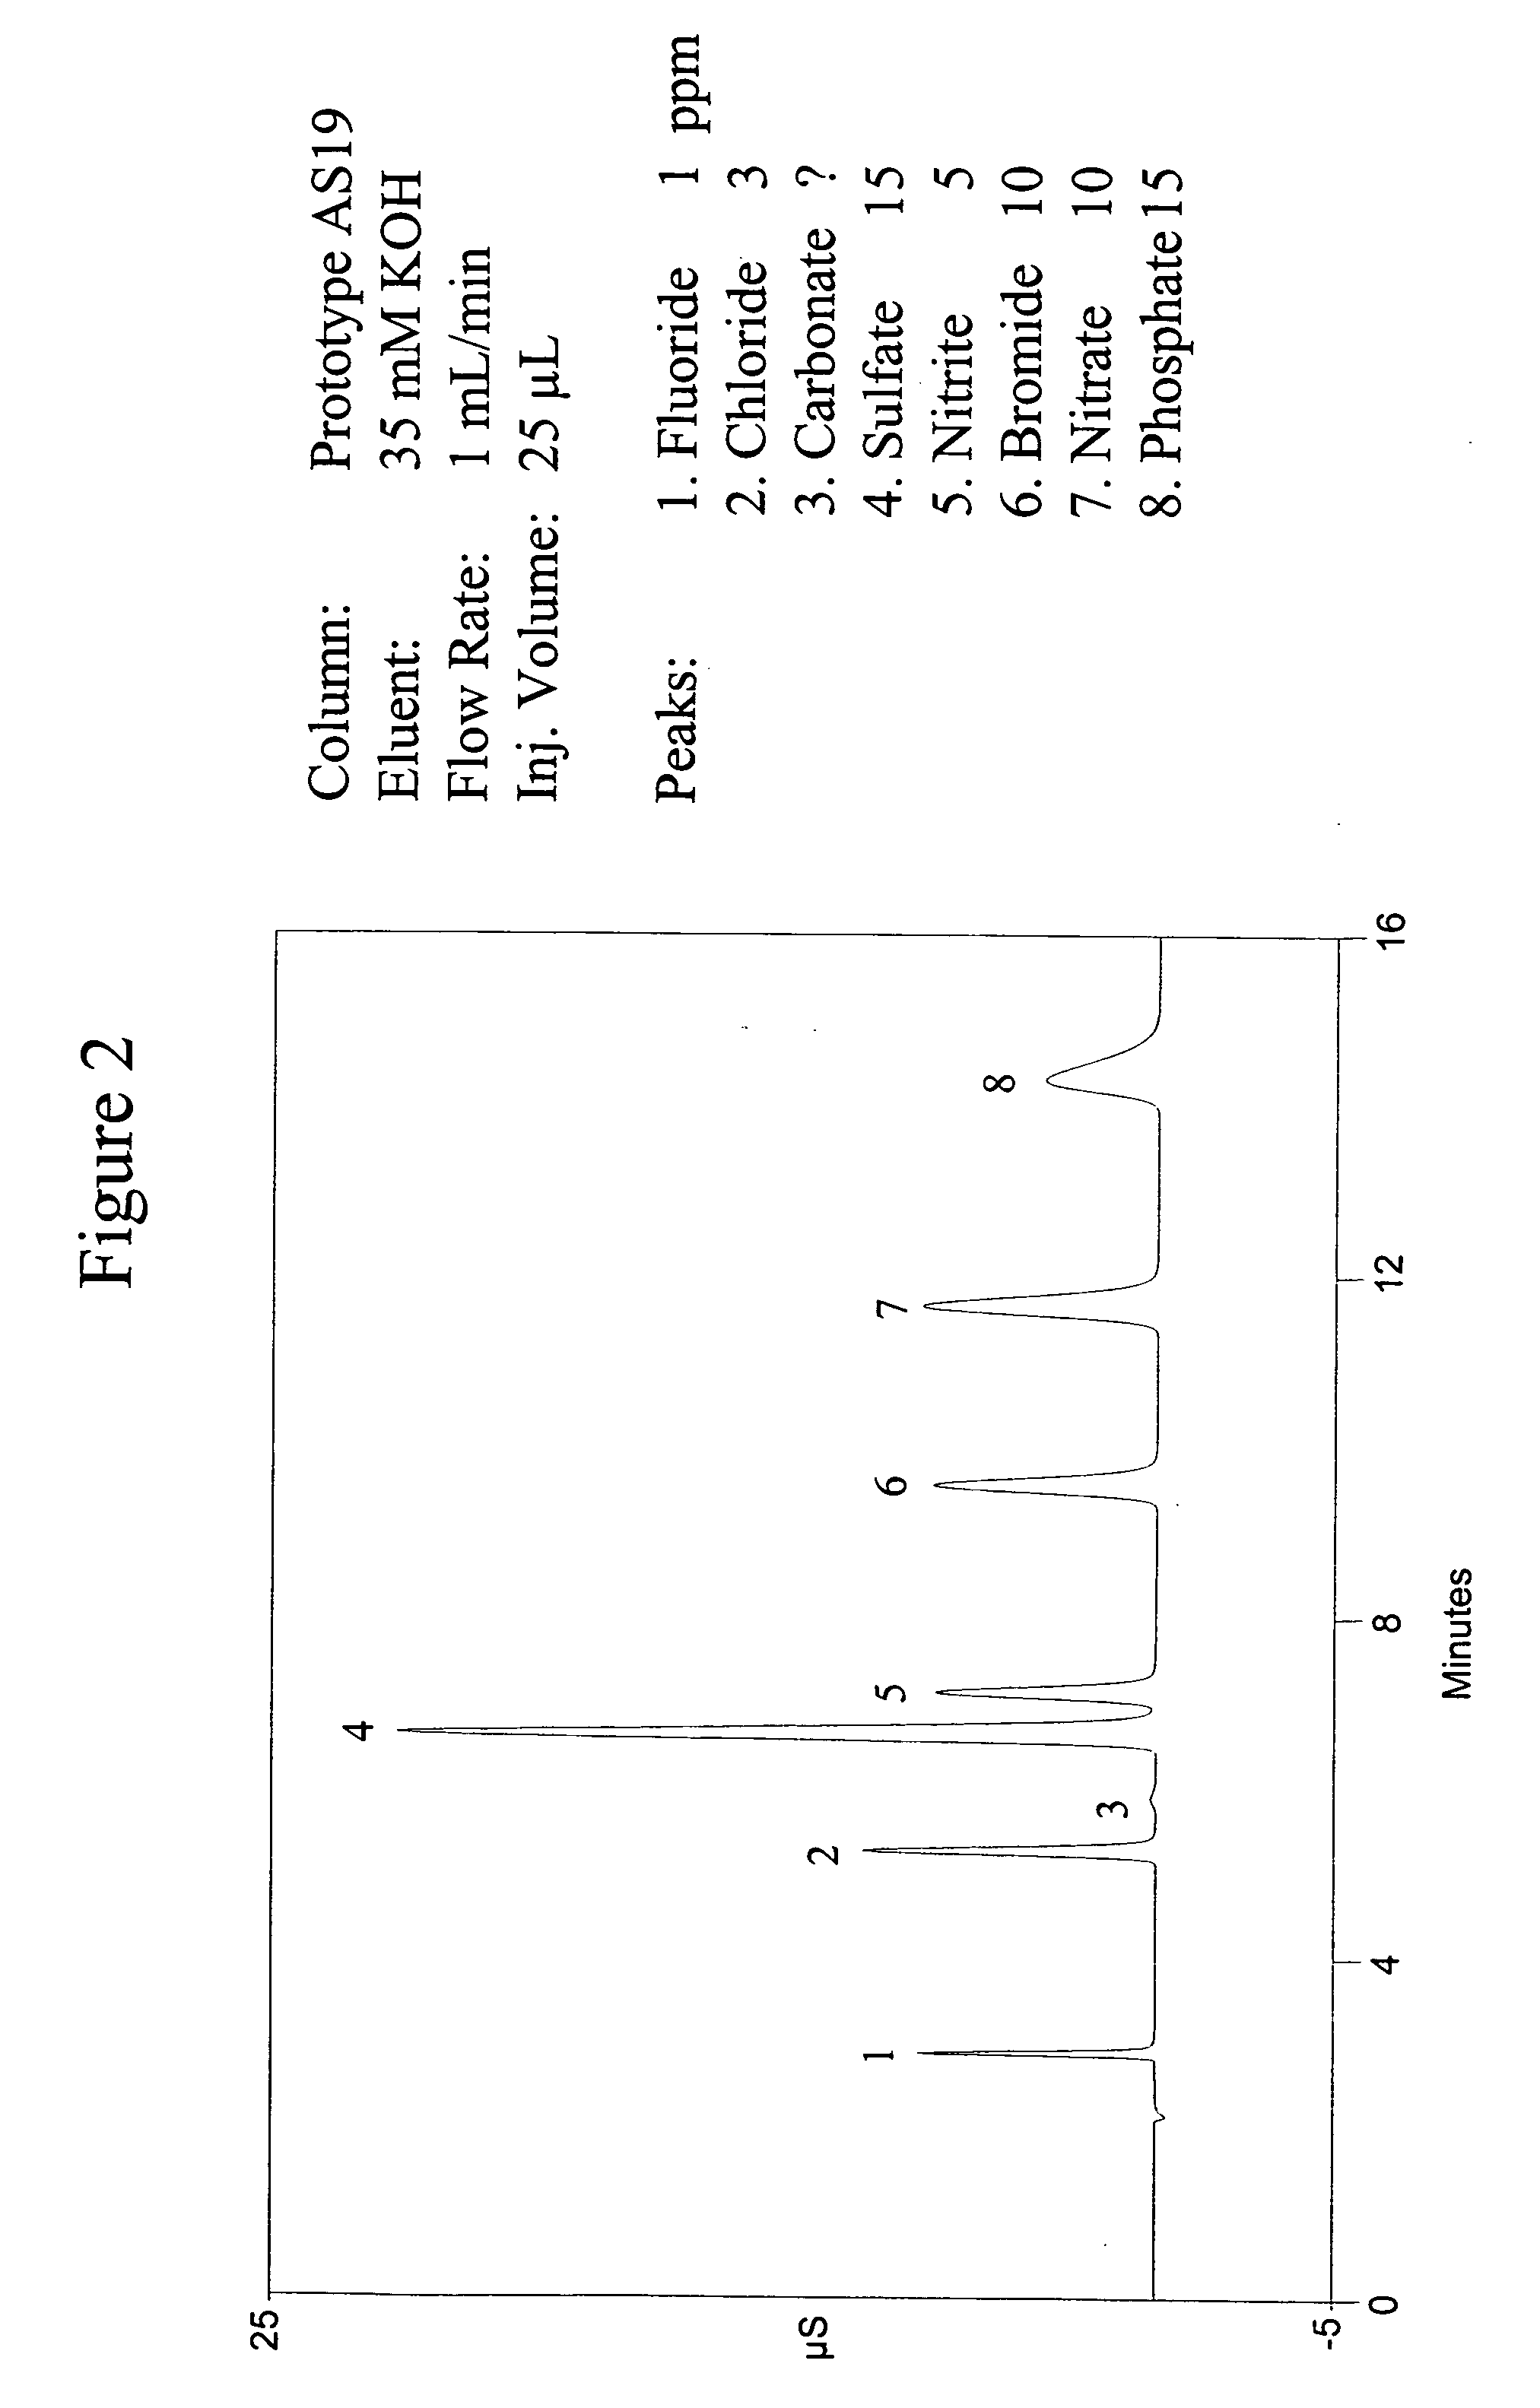 Coated ion exchange substrate and method of forming